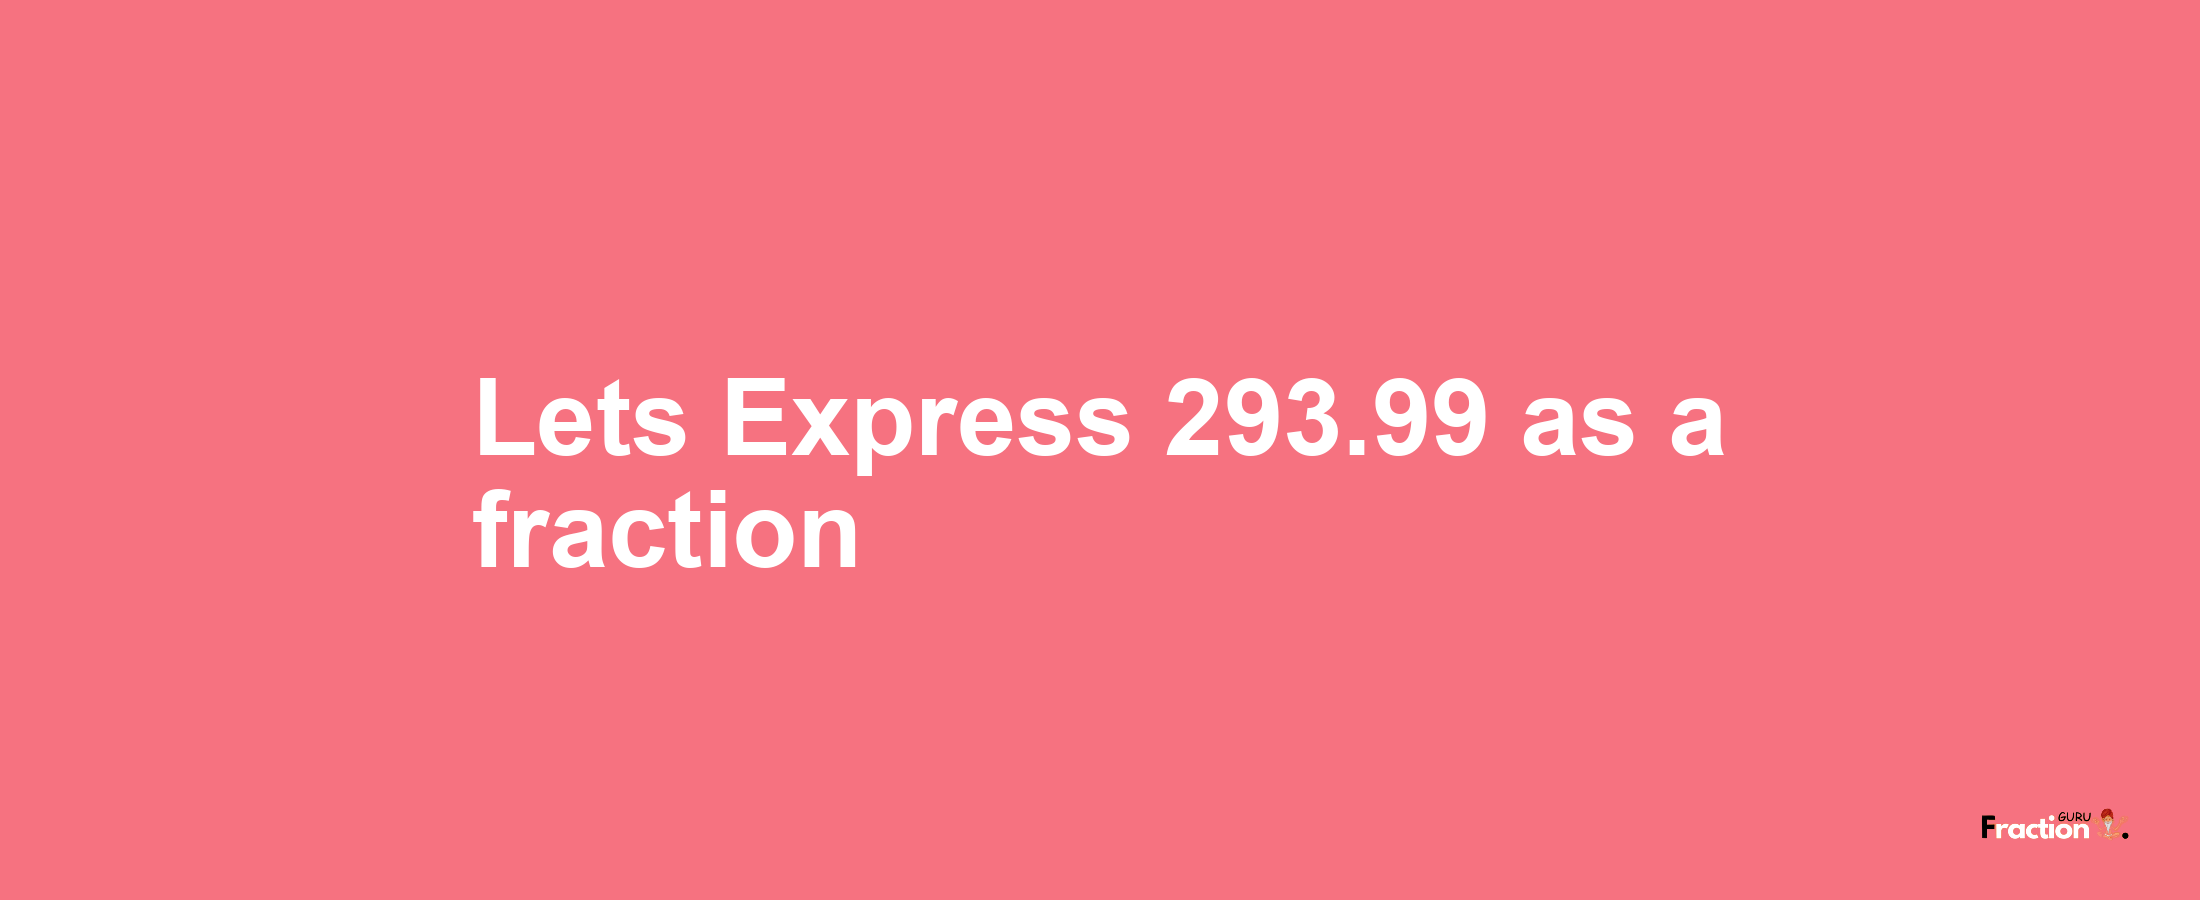 Lets Express 293.99 as afraction